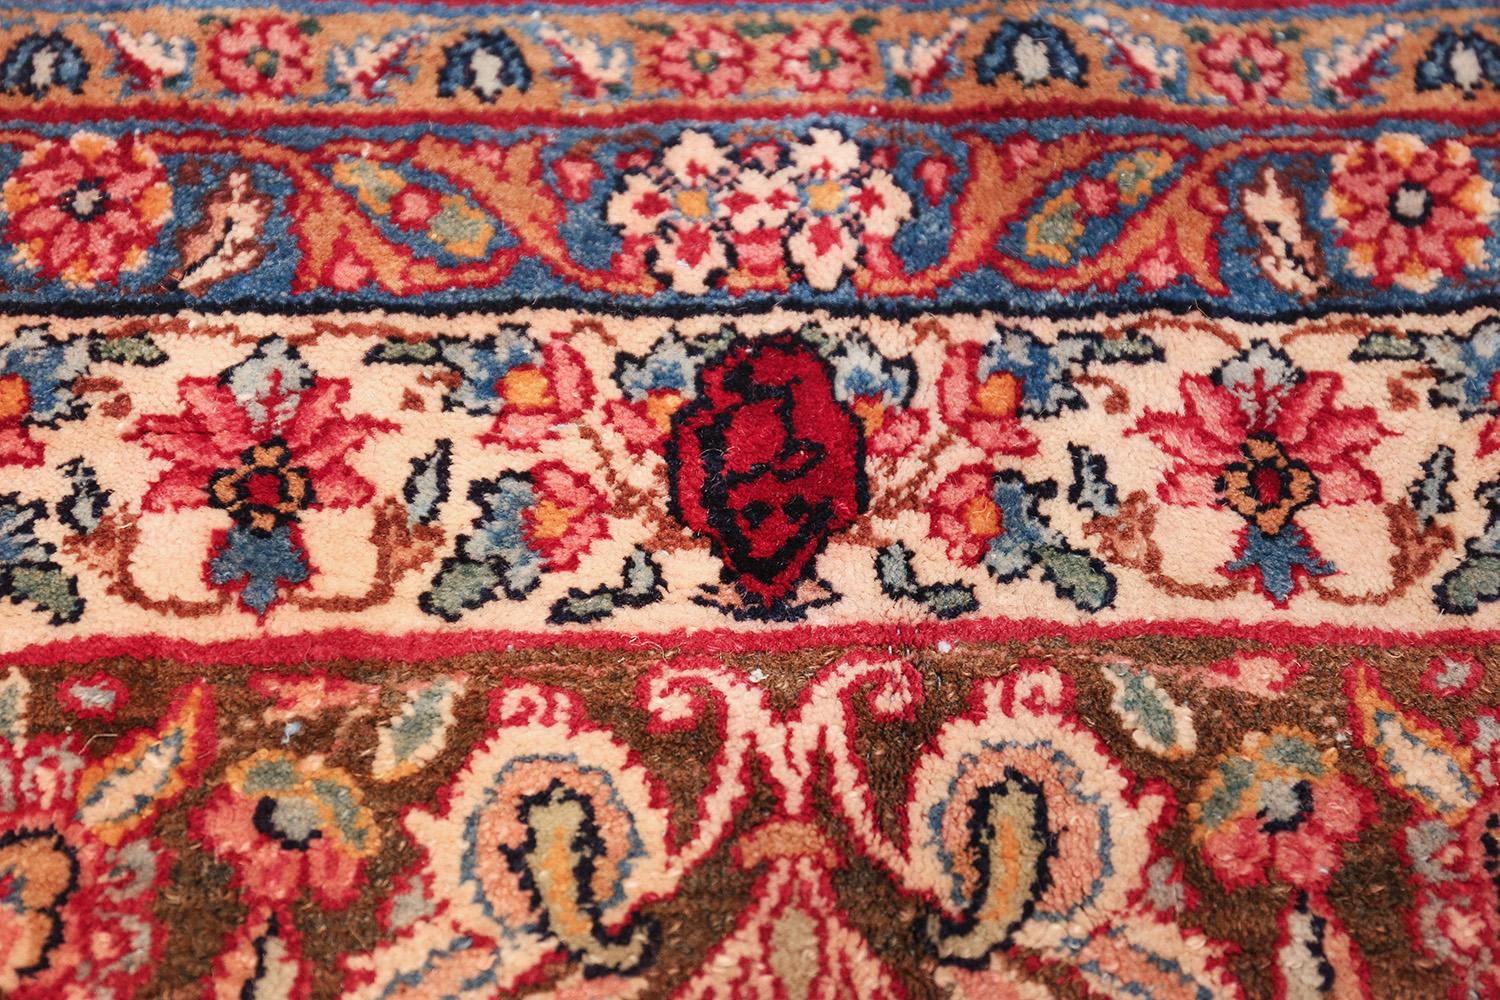 Antique Kerman Persian Rug. Size: 9 ft 9 in x 17 ft 3 in (2.97 m x 5.26 m) 3